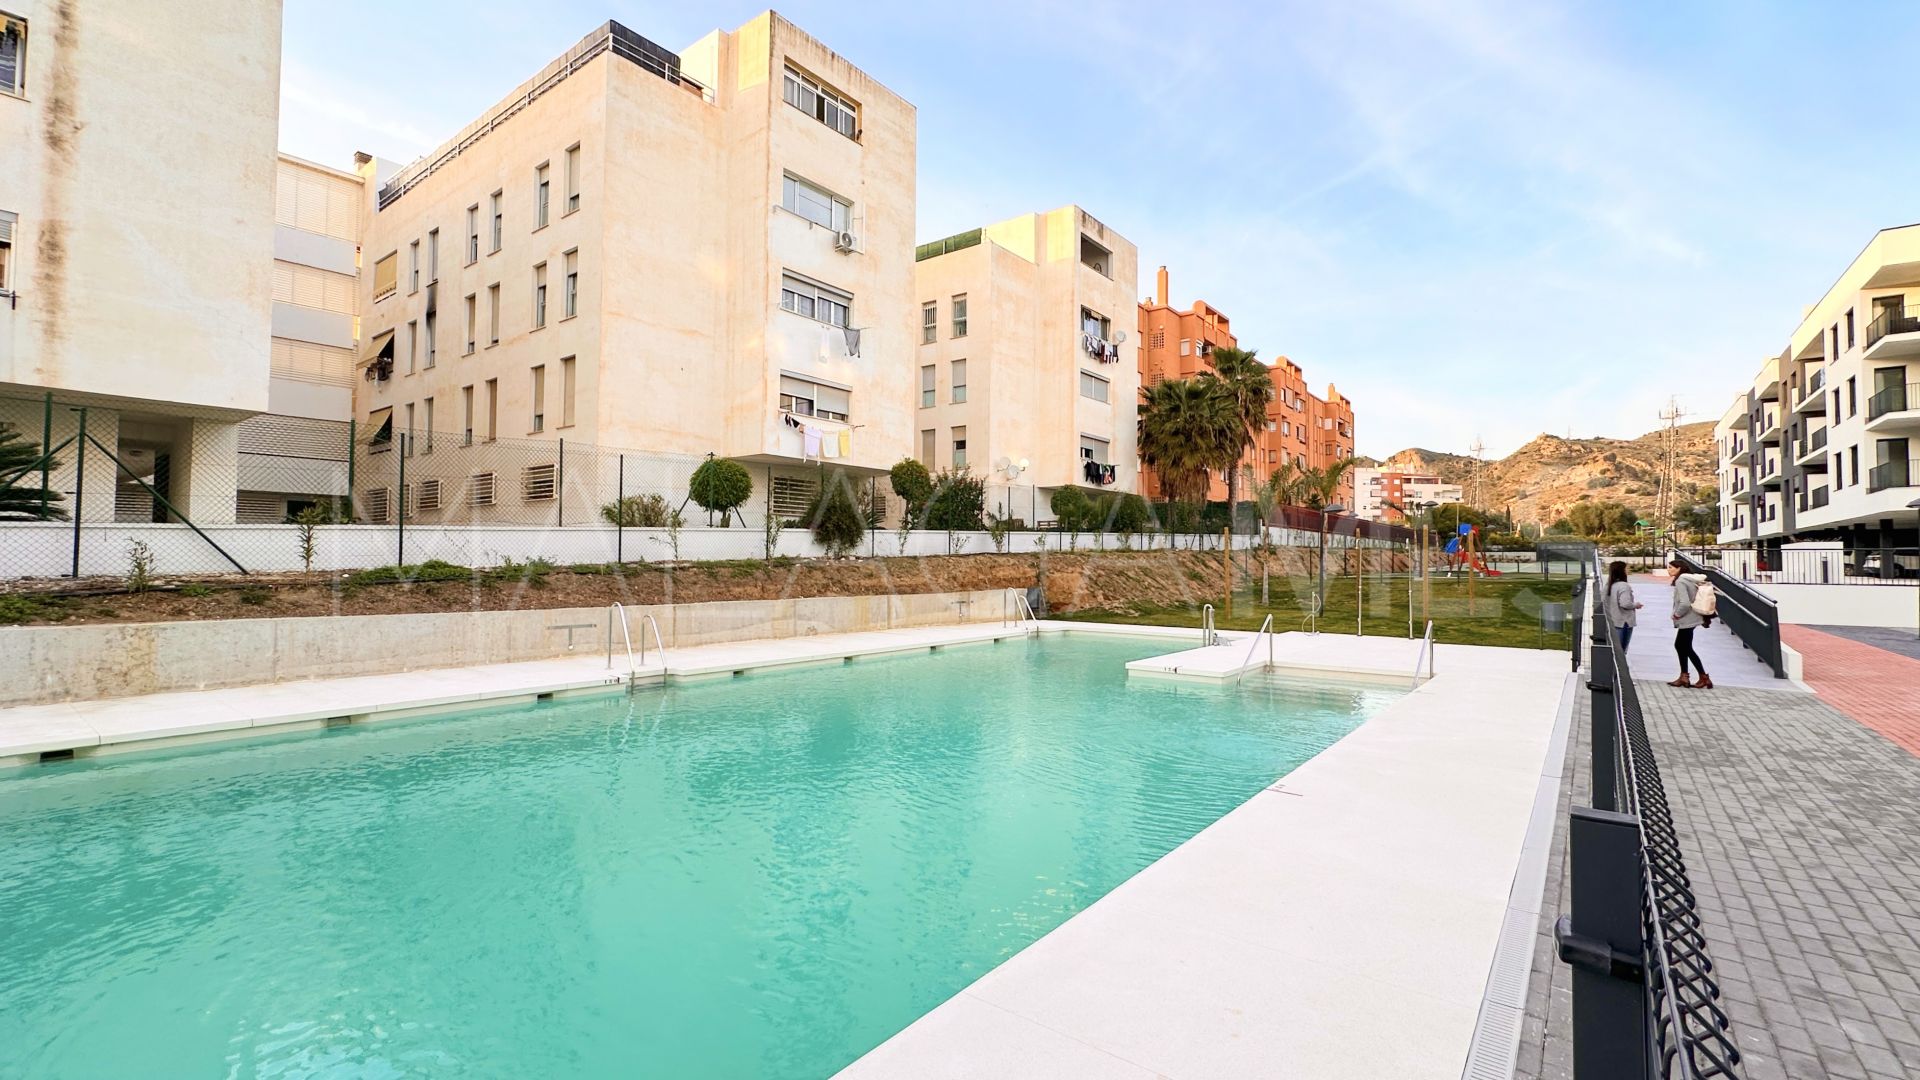 2 bedrooms apartment in El Atabal for sale